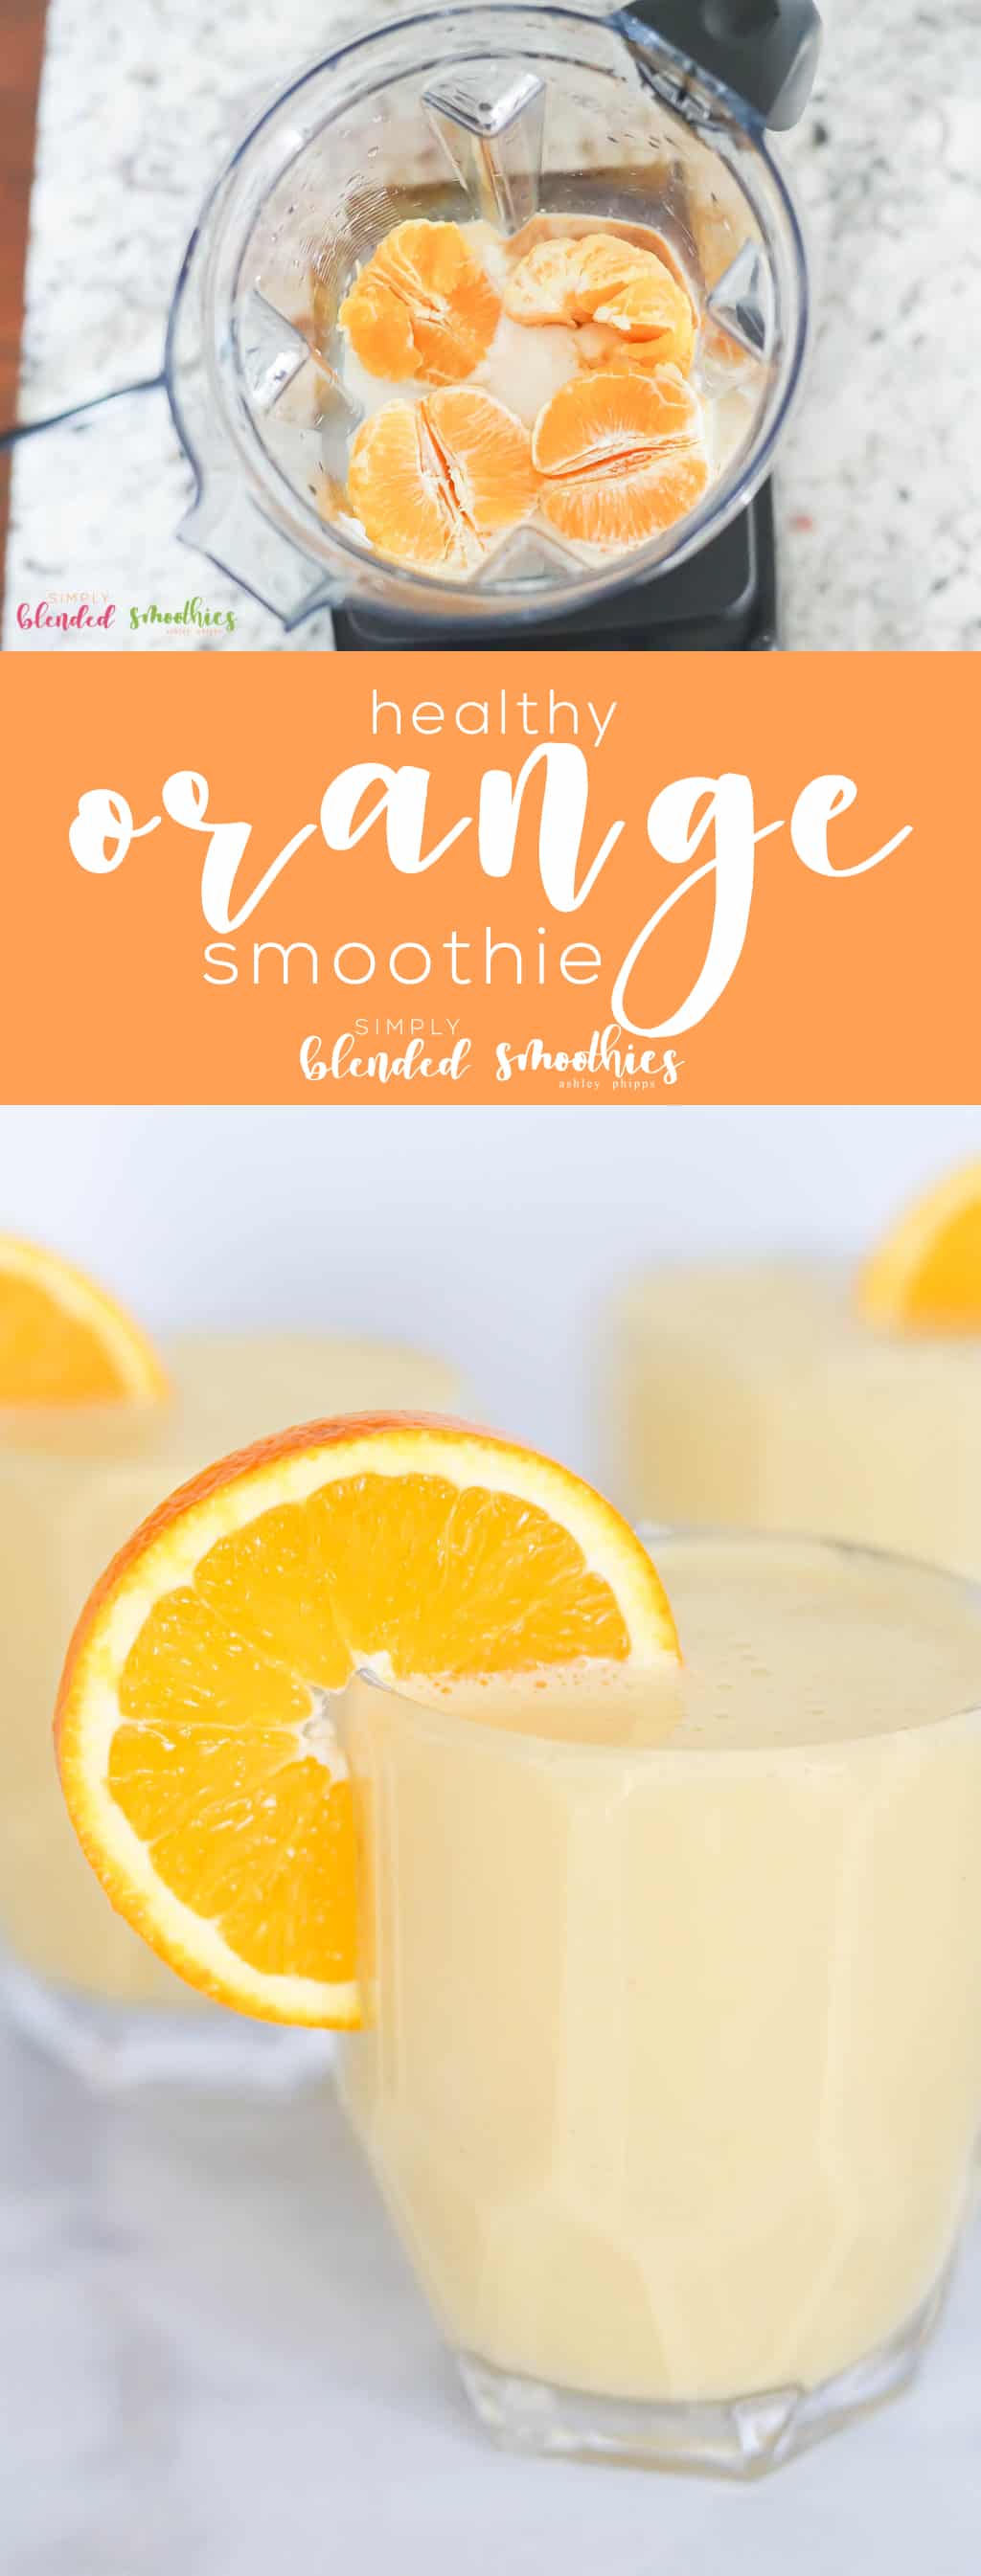 Healthy Orange Smoothie - Perfect For Breakfast, Lunch Or Dinner, This Orange Smoothie Is Made With Real, Whole Oranges And Is A Nutrient-Rich And Delicious Smoothie!